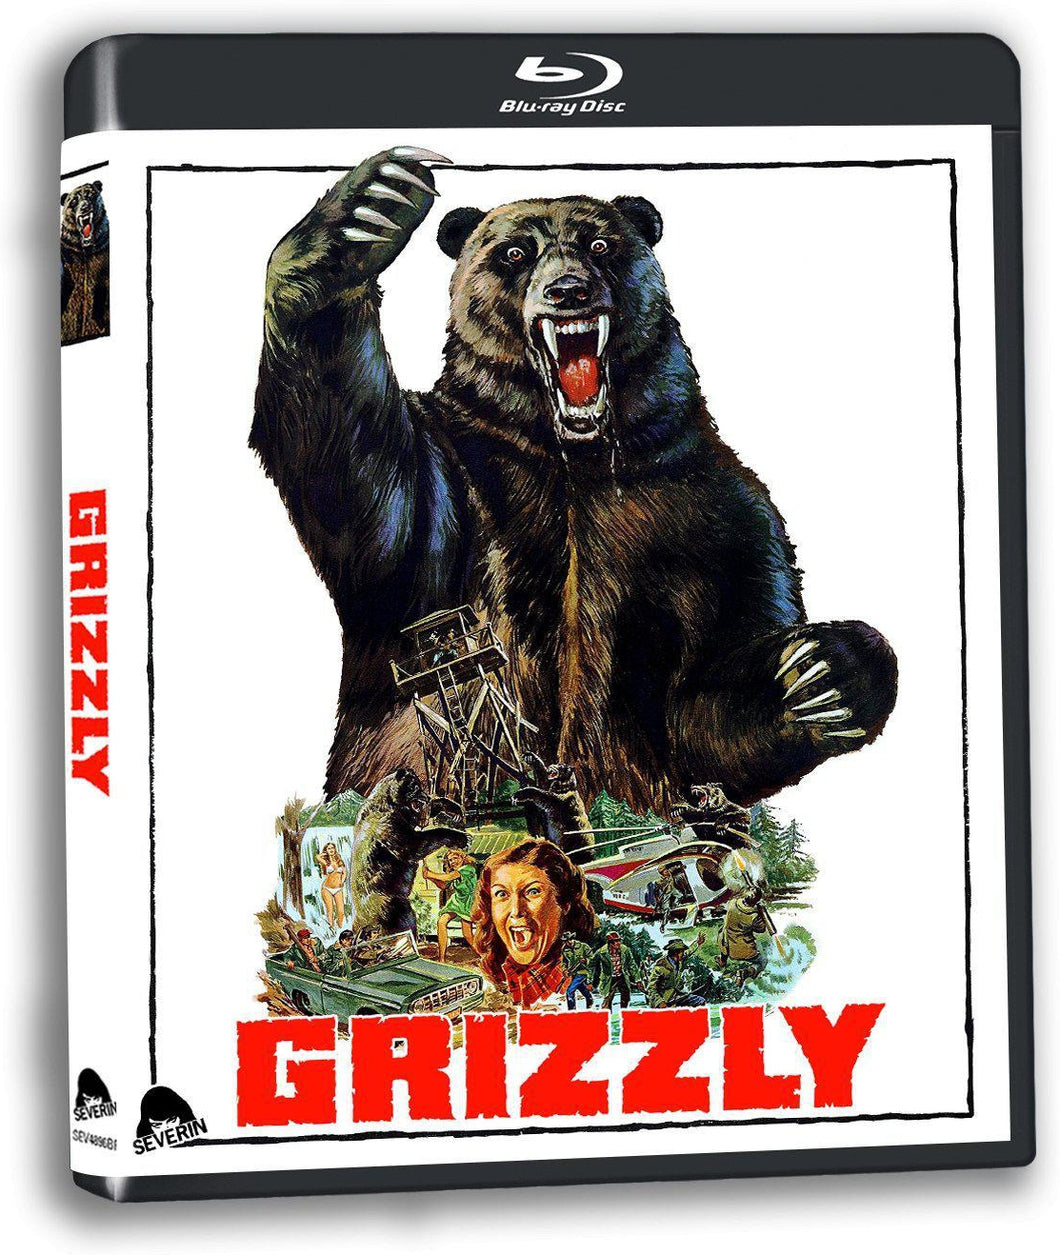 Grizzly (Blu-ray): Ronin Flix